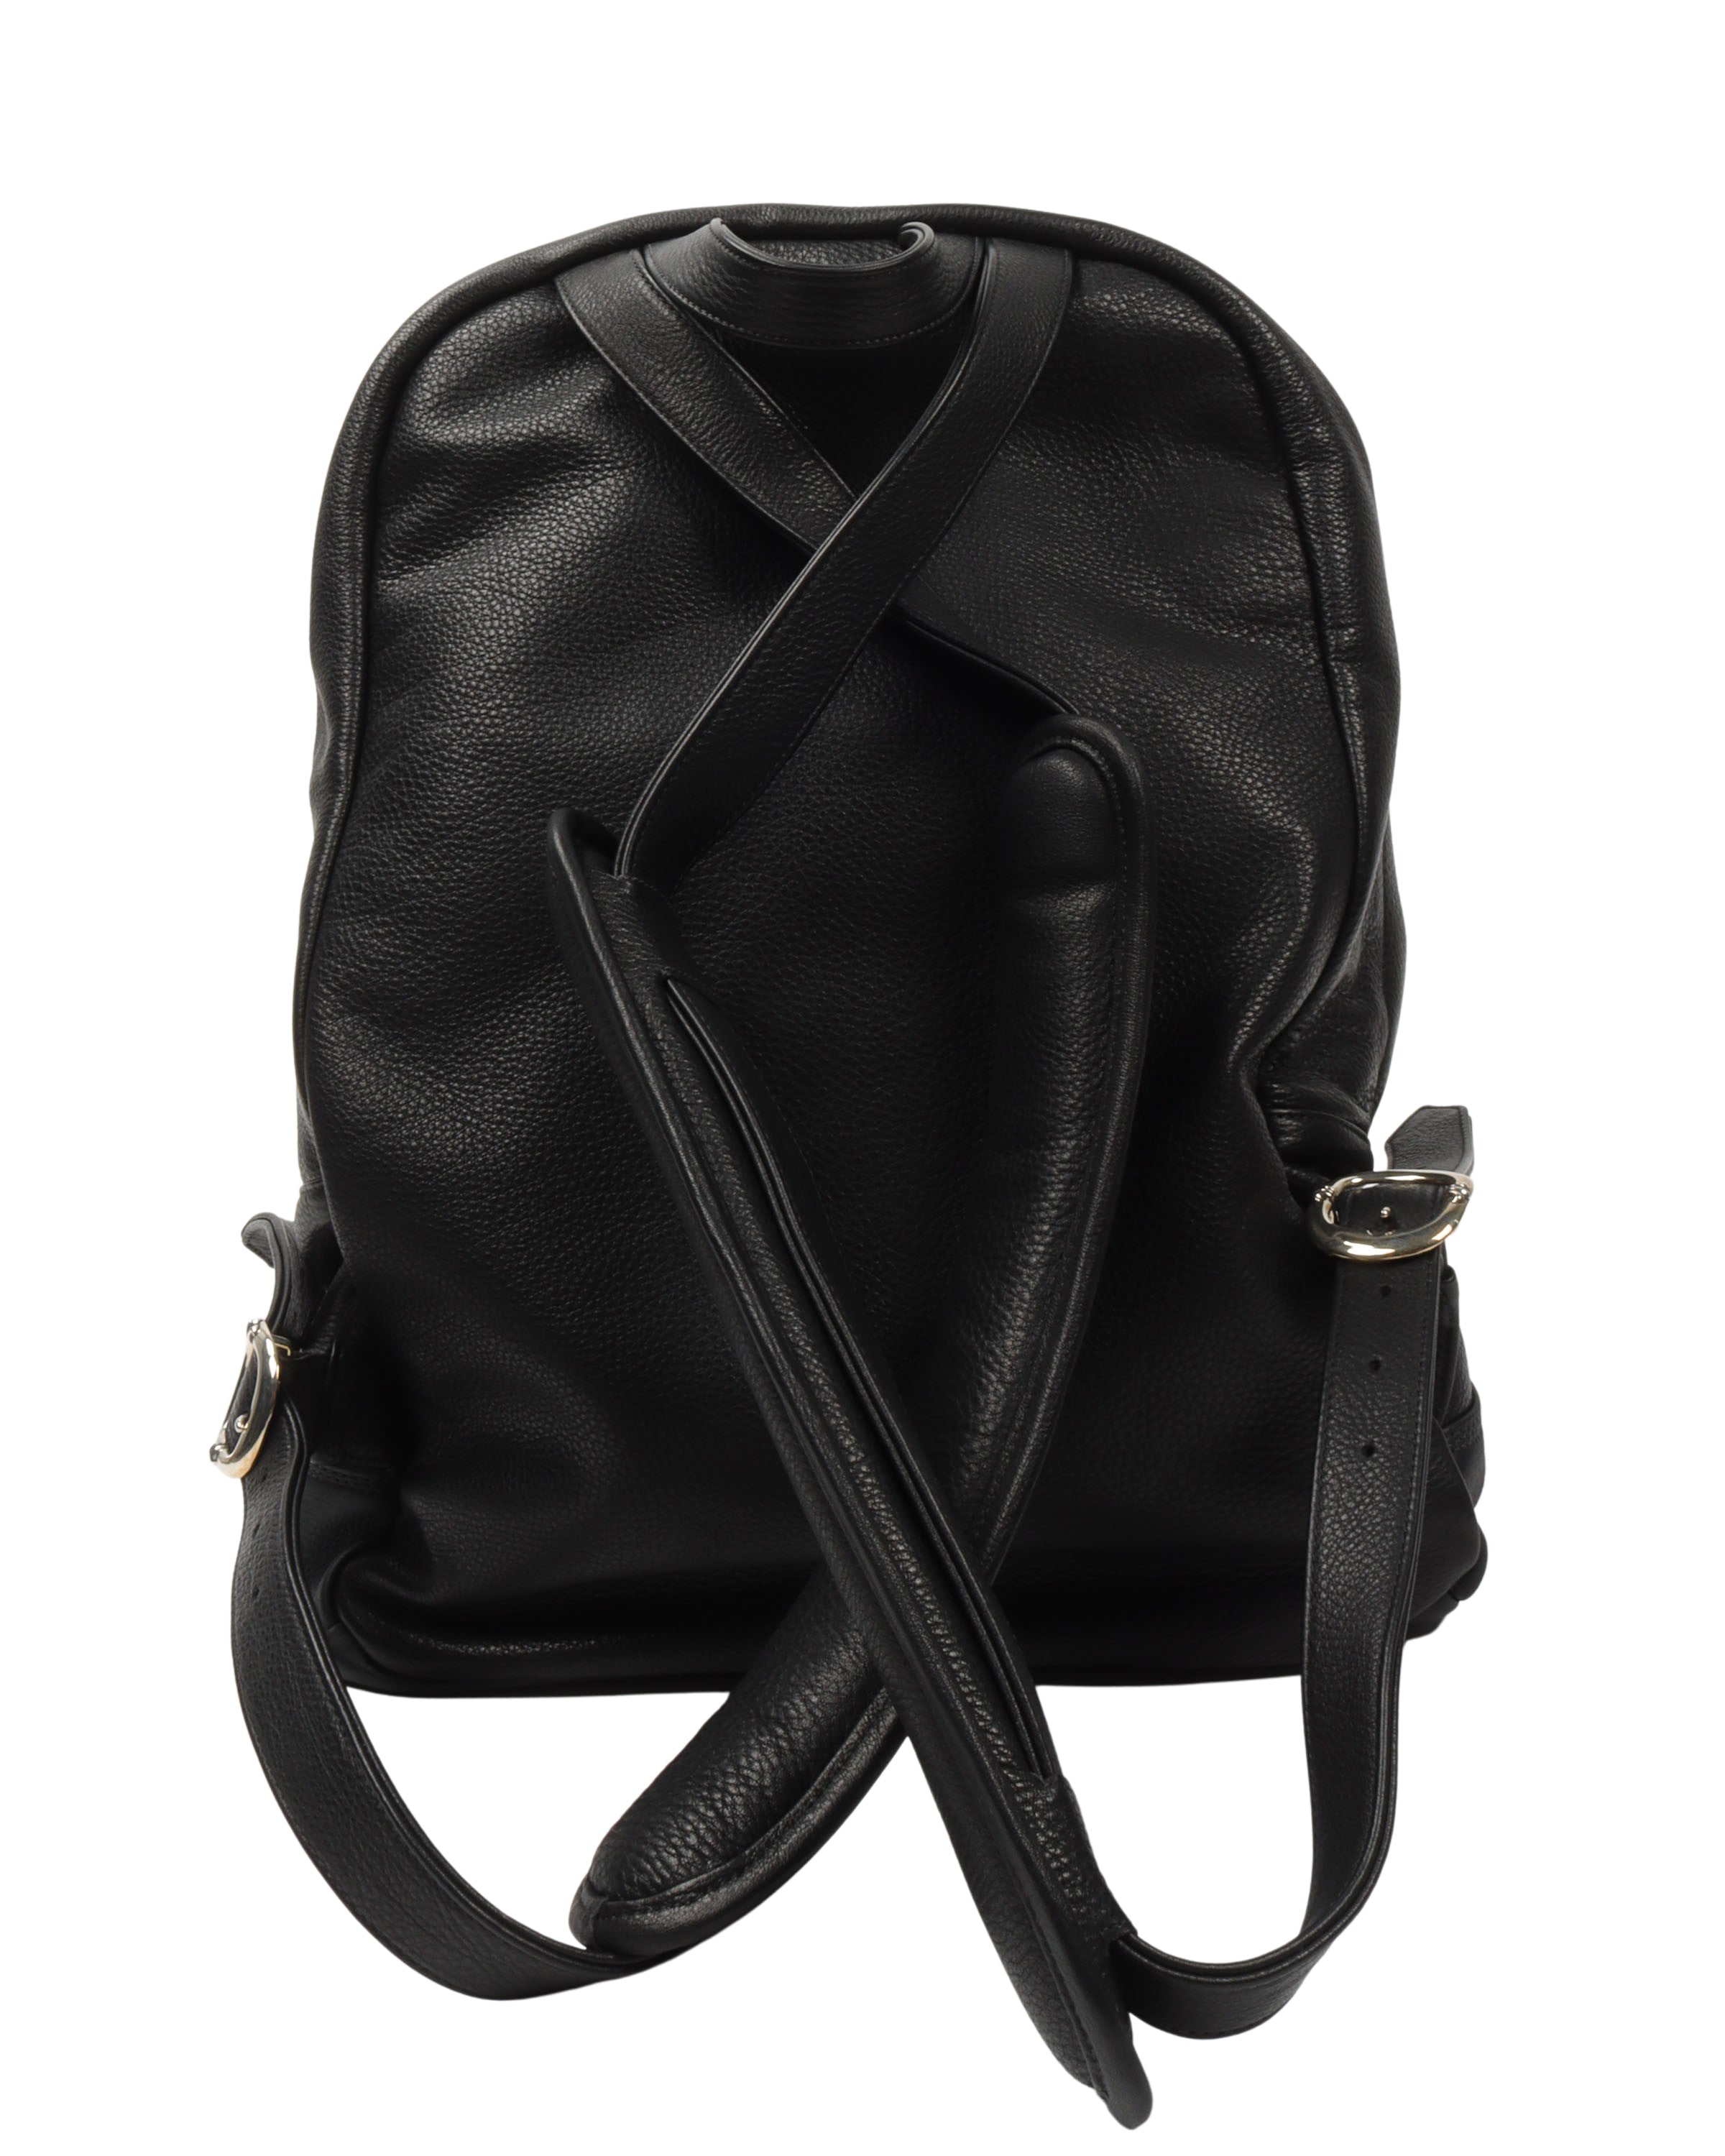 Leather Multicolor Cross Patch Backpack